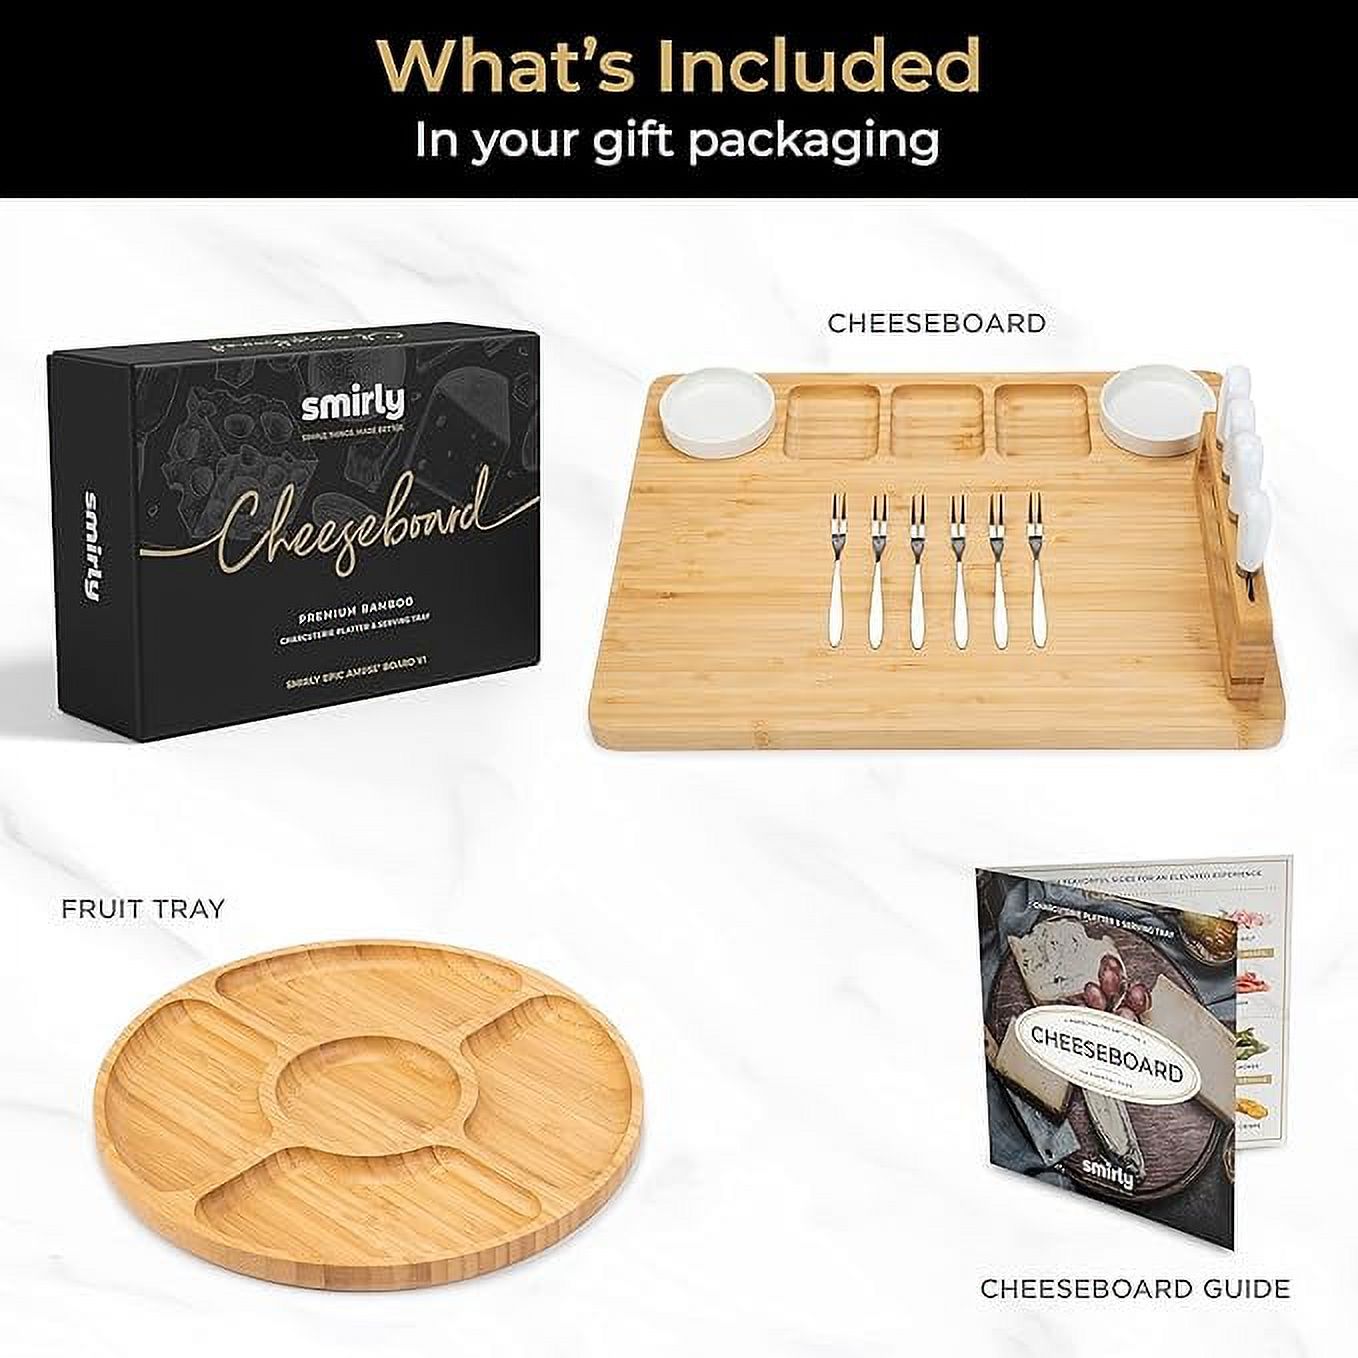 SMIRLY Charcuterie Board Set Large Rectangular Bamboo Cheese Board with Fruit Tray - image 2 of 6